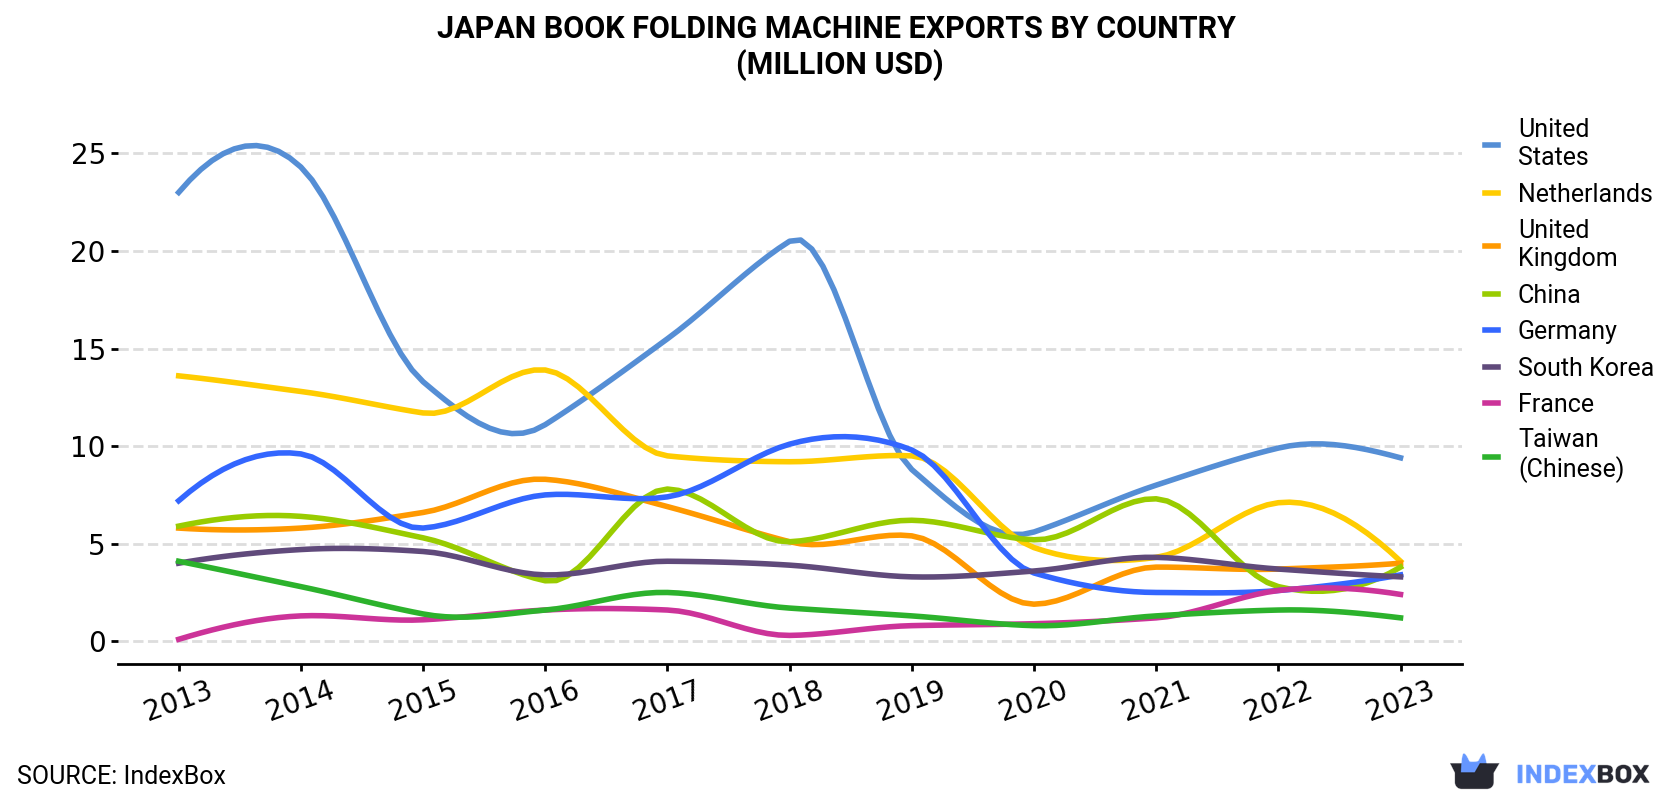 Japan Book Folding Machine Exports By Country (Million USD)